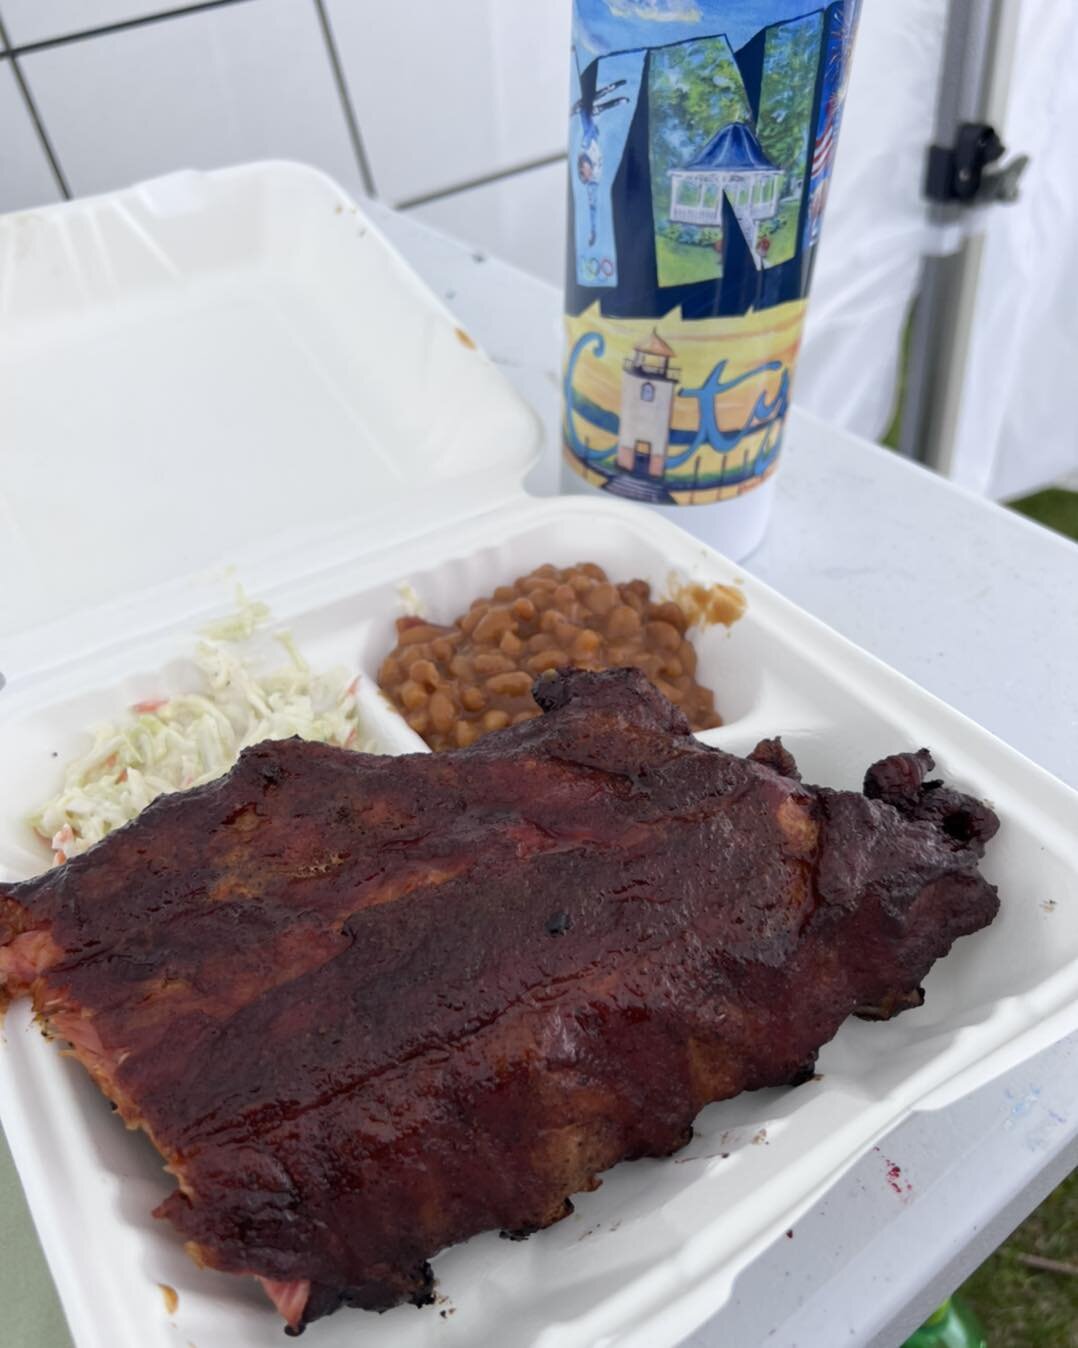 Just trust me. You have all day tomorrow to get the best smoked ribs, brisket, pulled pork, and amazing sides just a bone&rsquo;s throw away from our outdoor paint studio! 
You don&rsquo;t want any of their pork belly, just leave it for me and I&rsqu